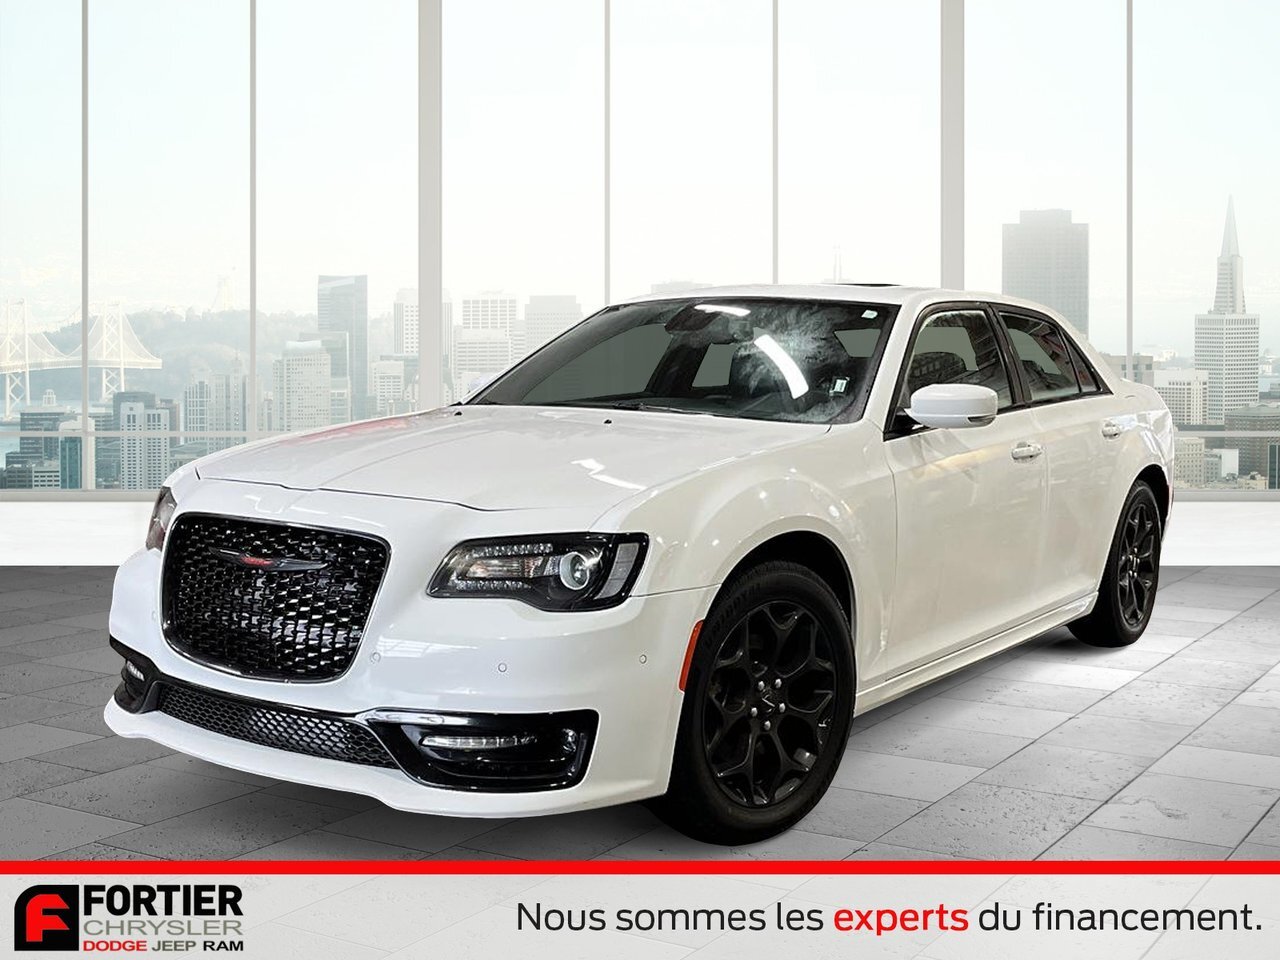 2022 Chrysler 300 S AWD + V6 + LEATHER + PANORAMIC TOP + REMOTE STAR